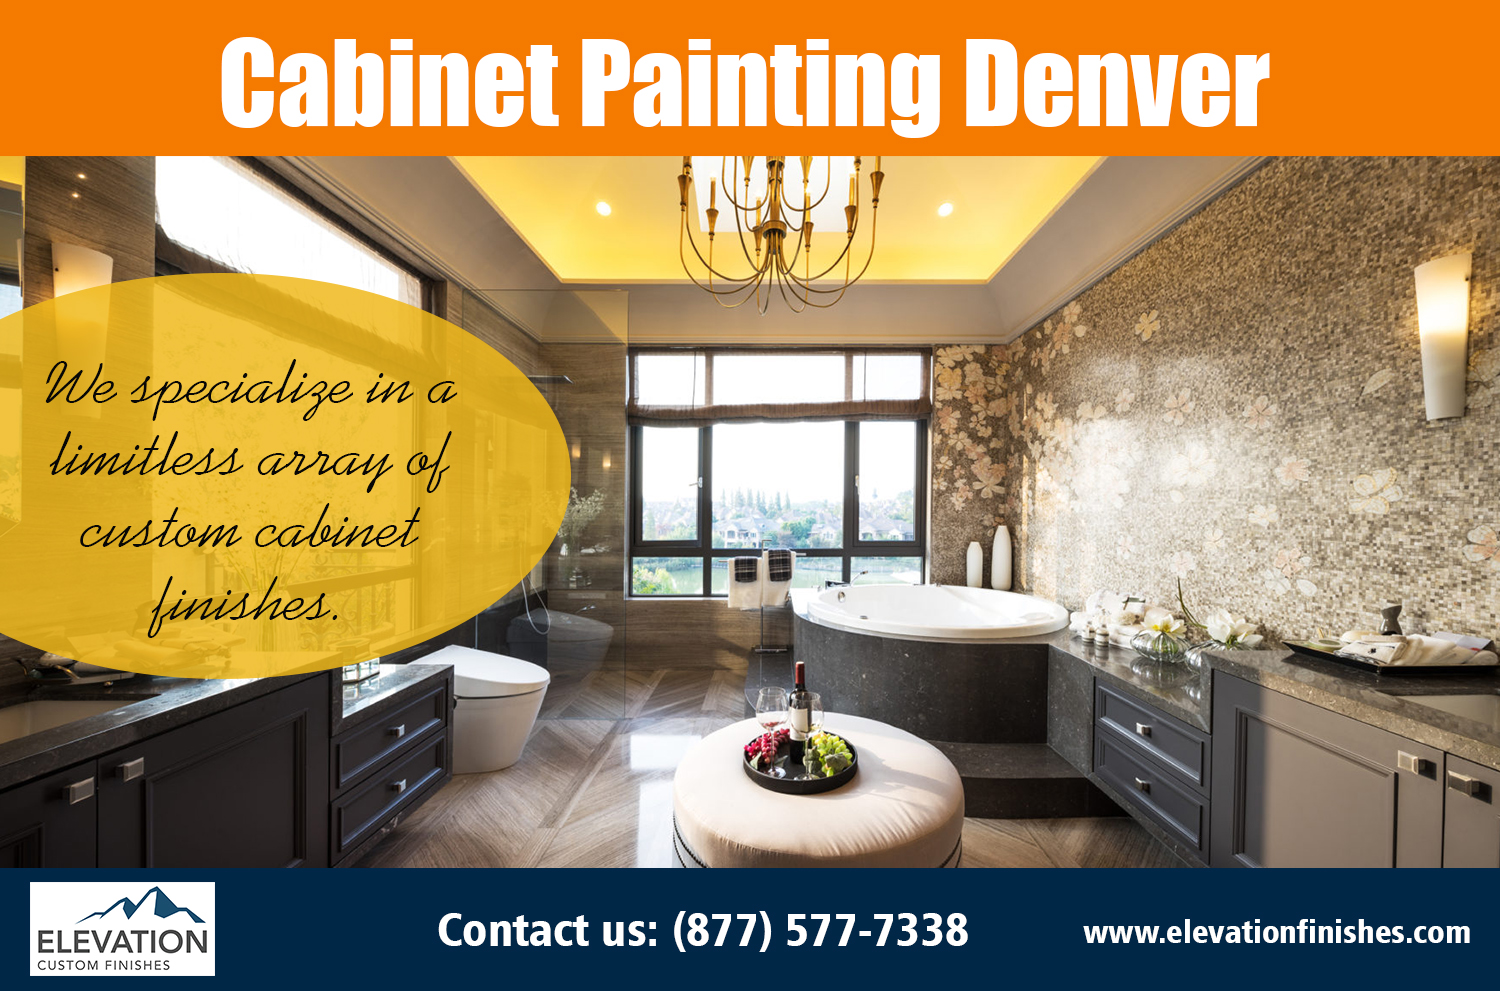 Cabinet Painting Denver Site Pictures